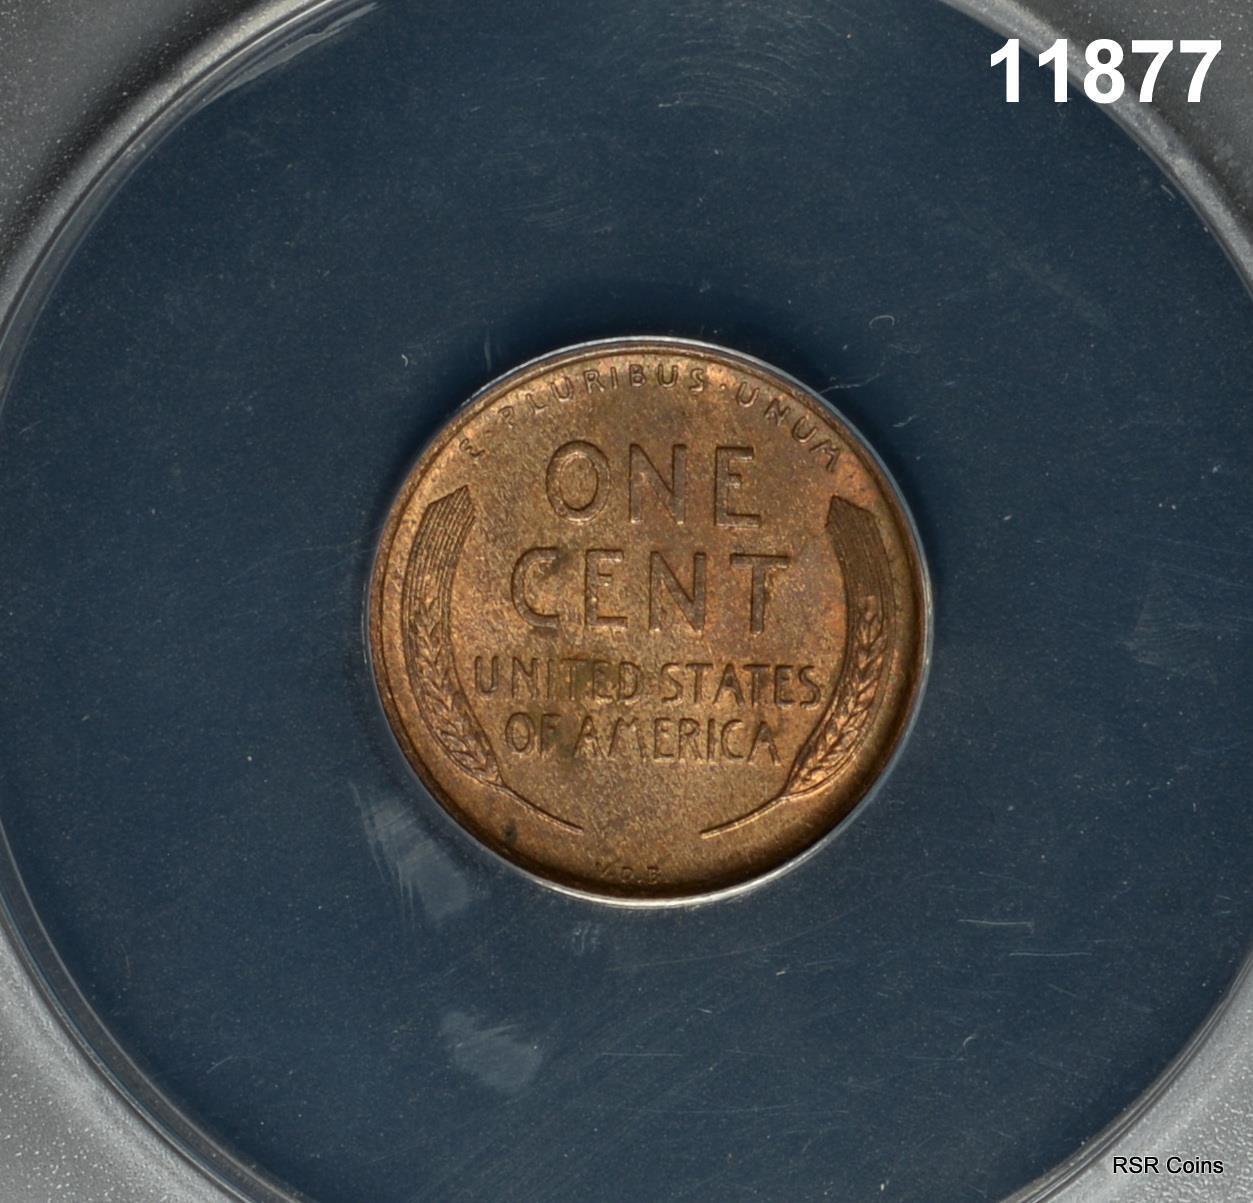 1909 VDB LINCOLN CENT ANACS CERTIFIED MS64 RB #11877